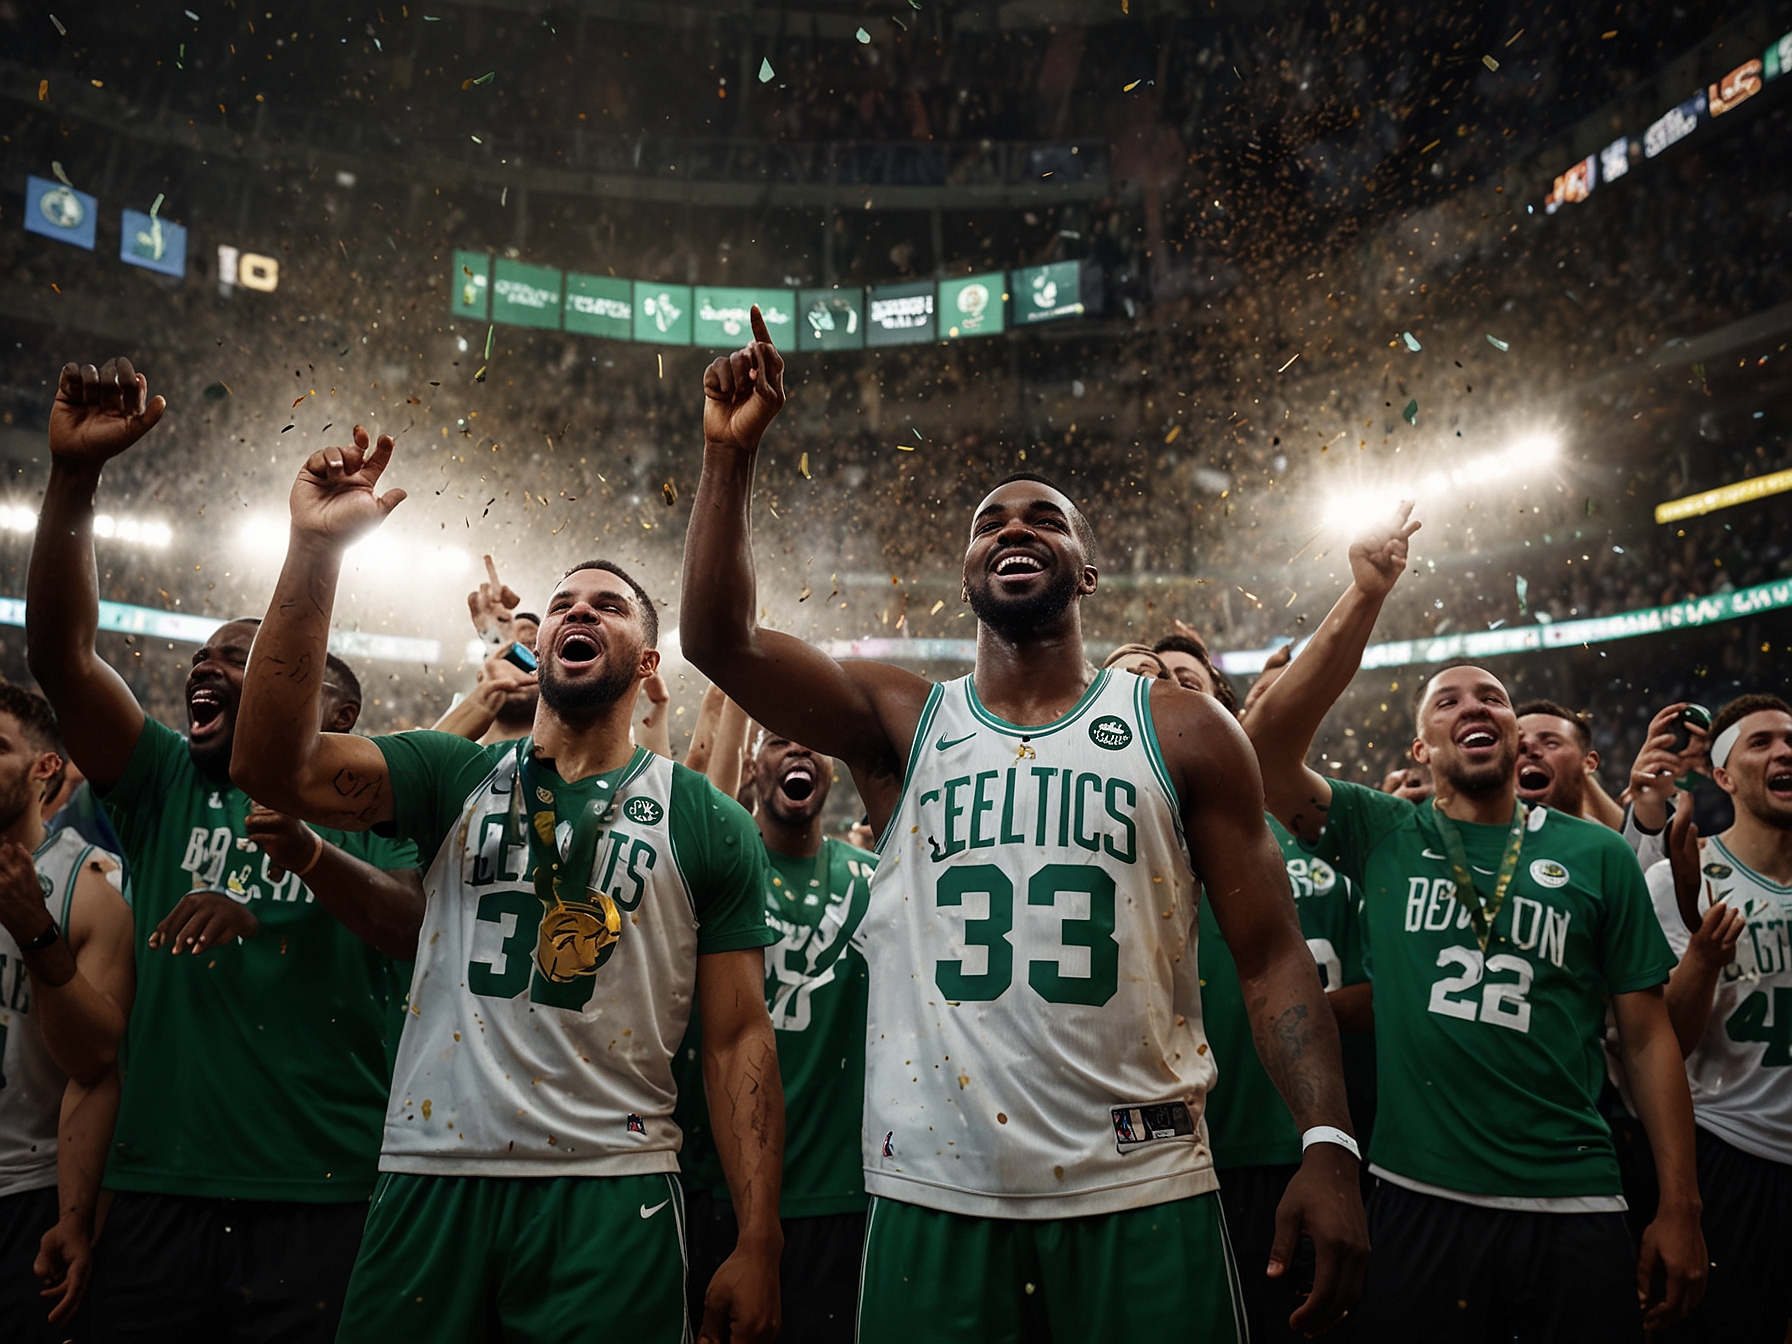 Boston Celtics players celebrate their 18th NBA title victory on the court at TD Garden, as confetti rains down and fans cheer in the background, capturing the historic moment.